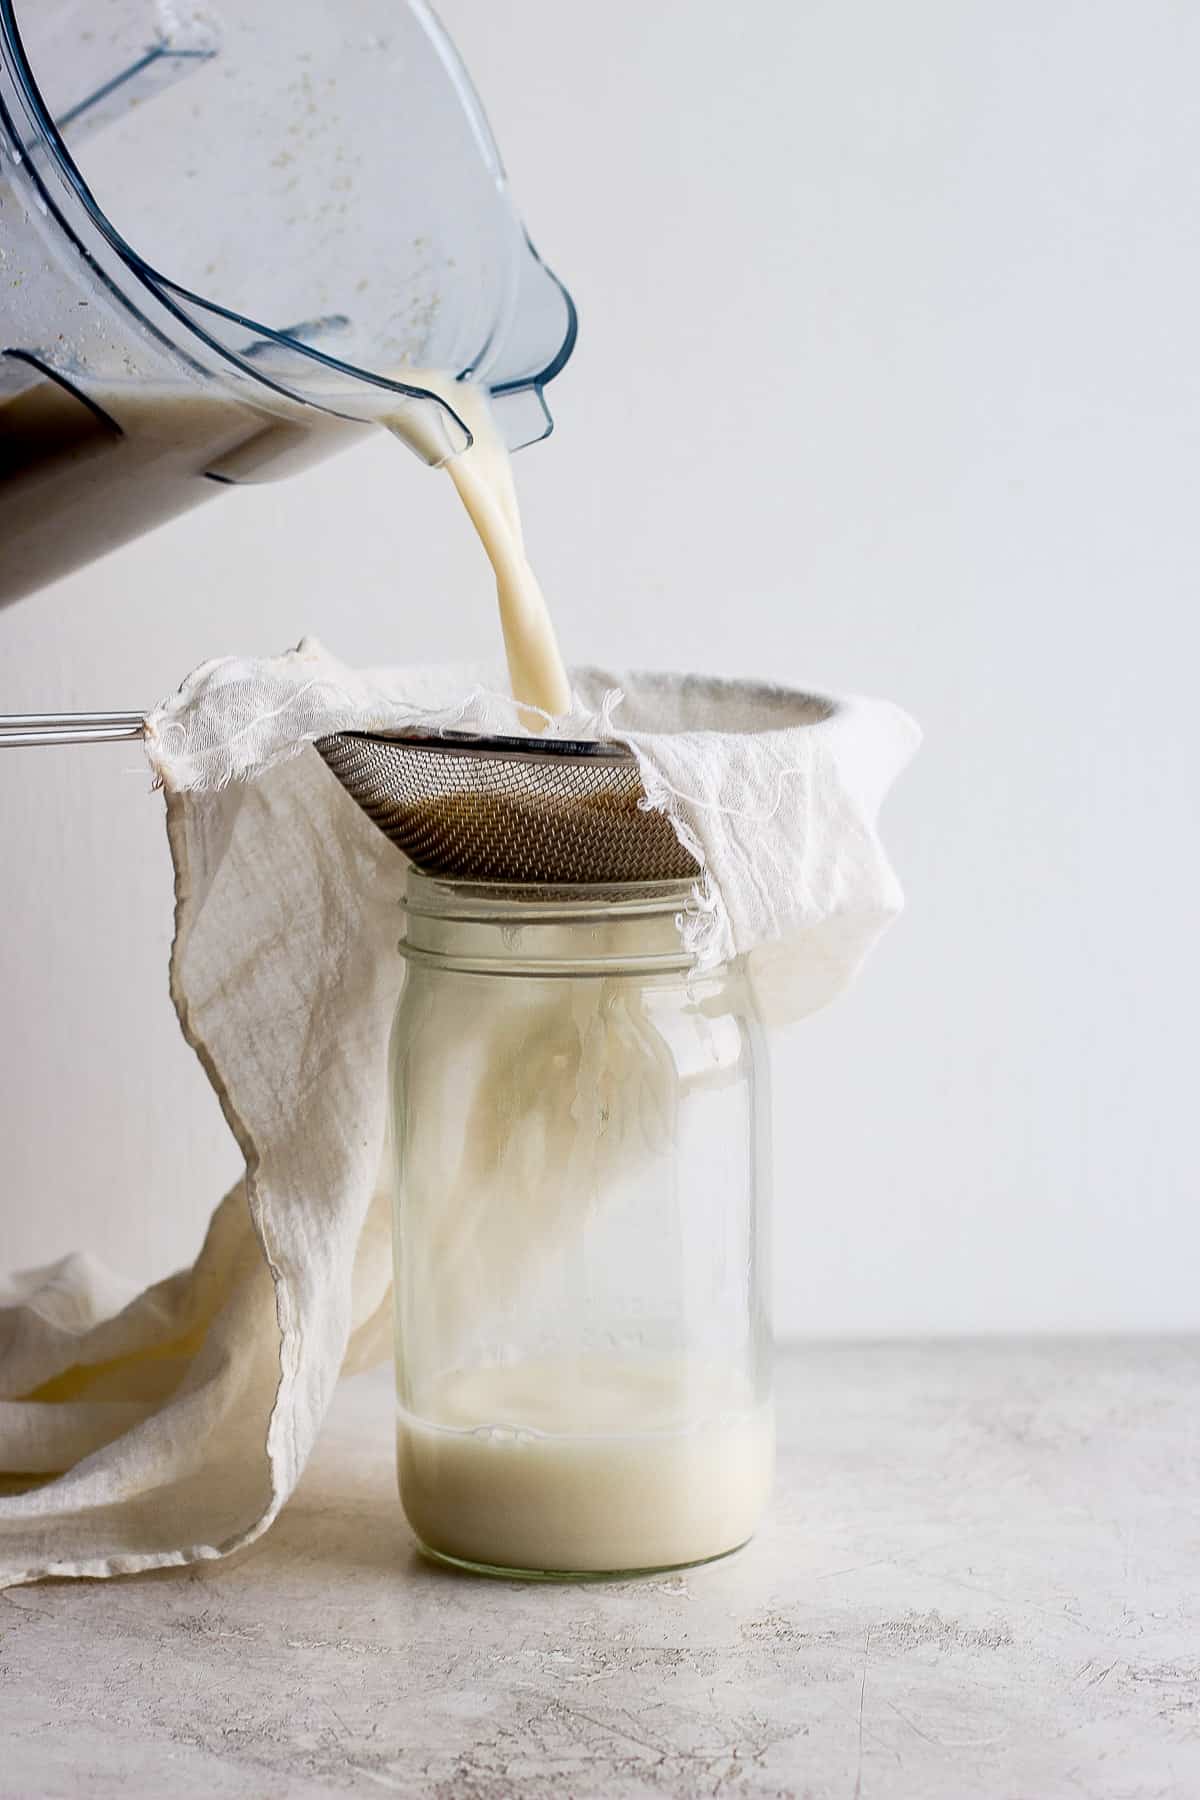 Straining the oat milk with a cheese cloth